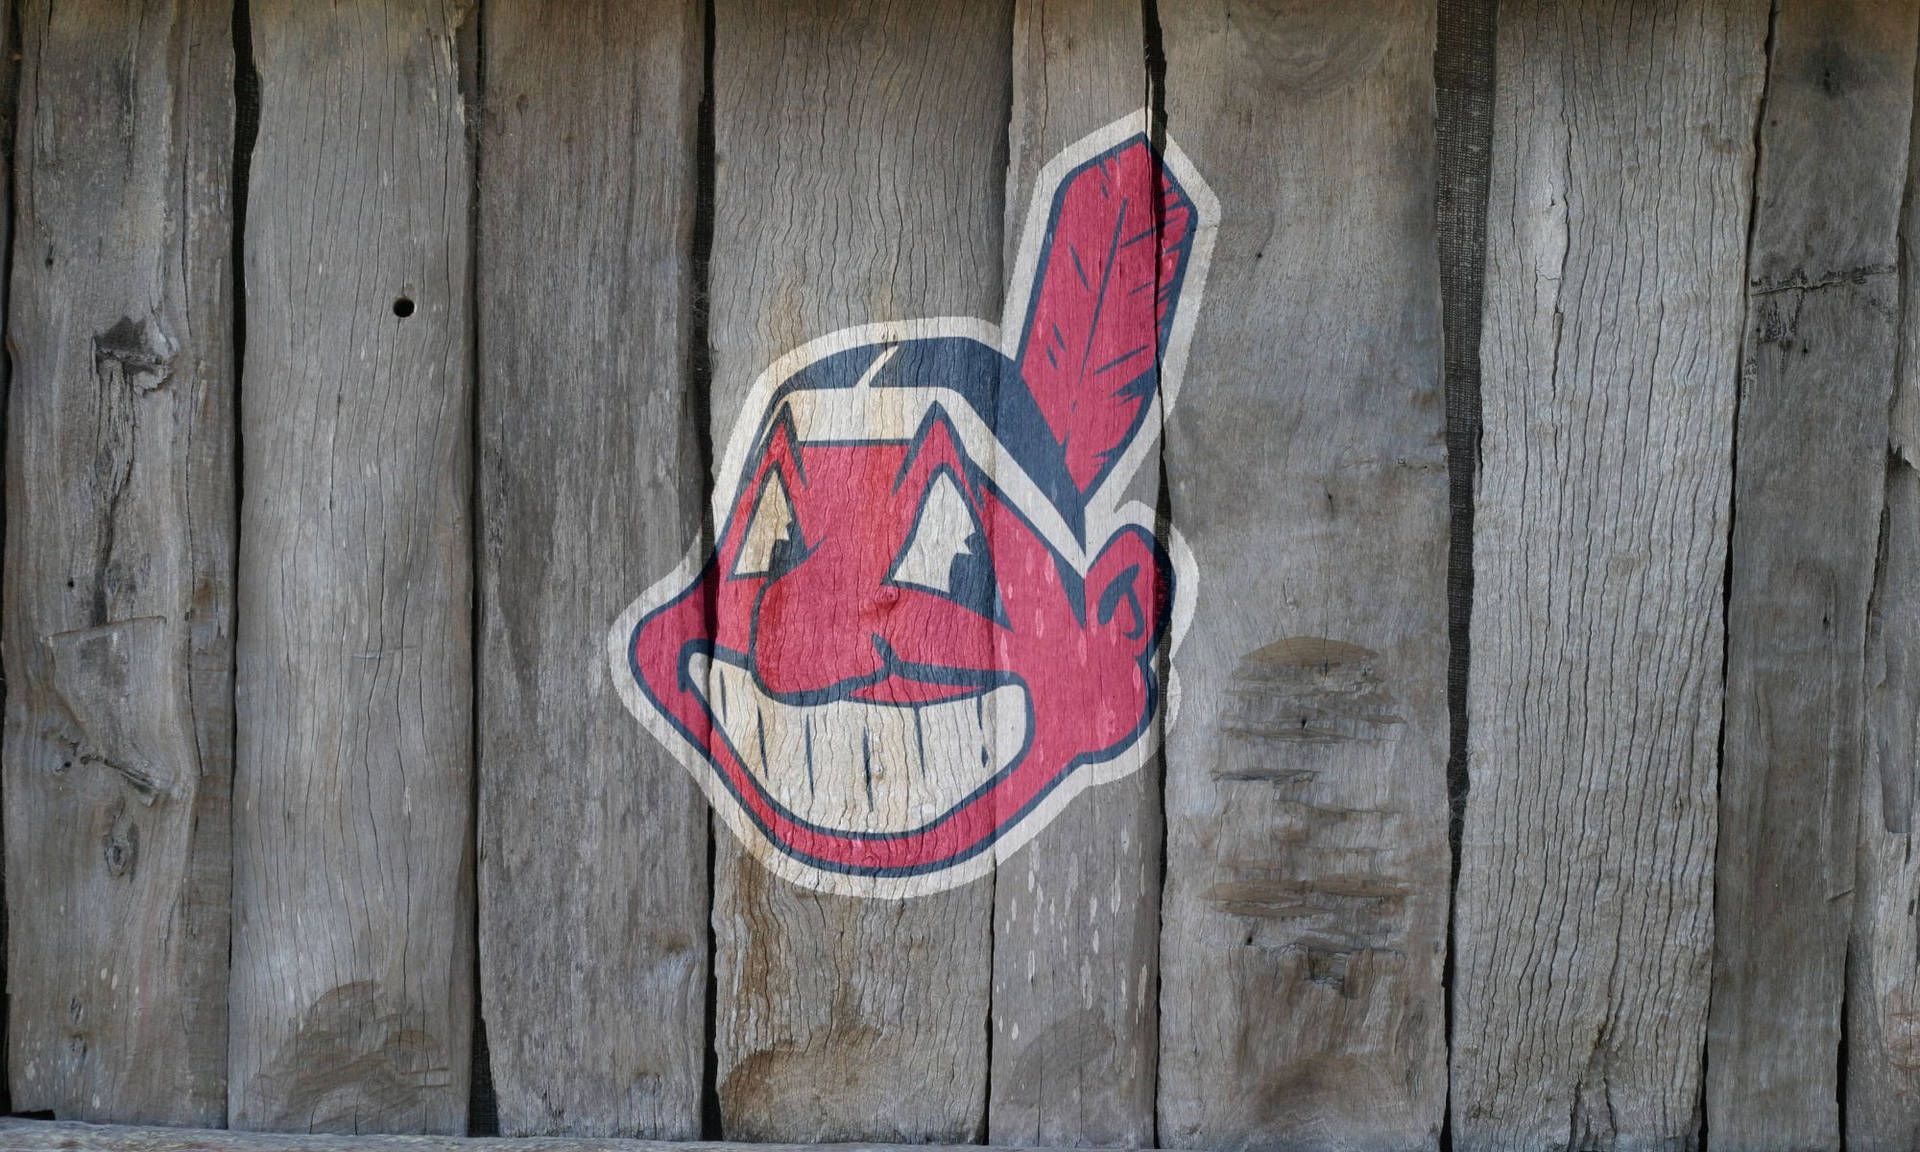 iphone cleveland indians